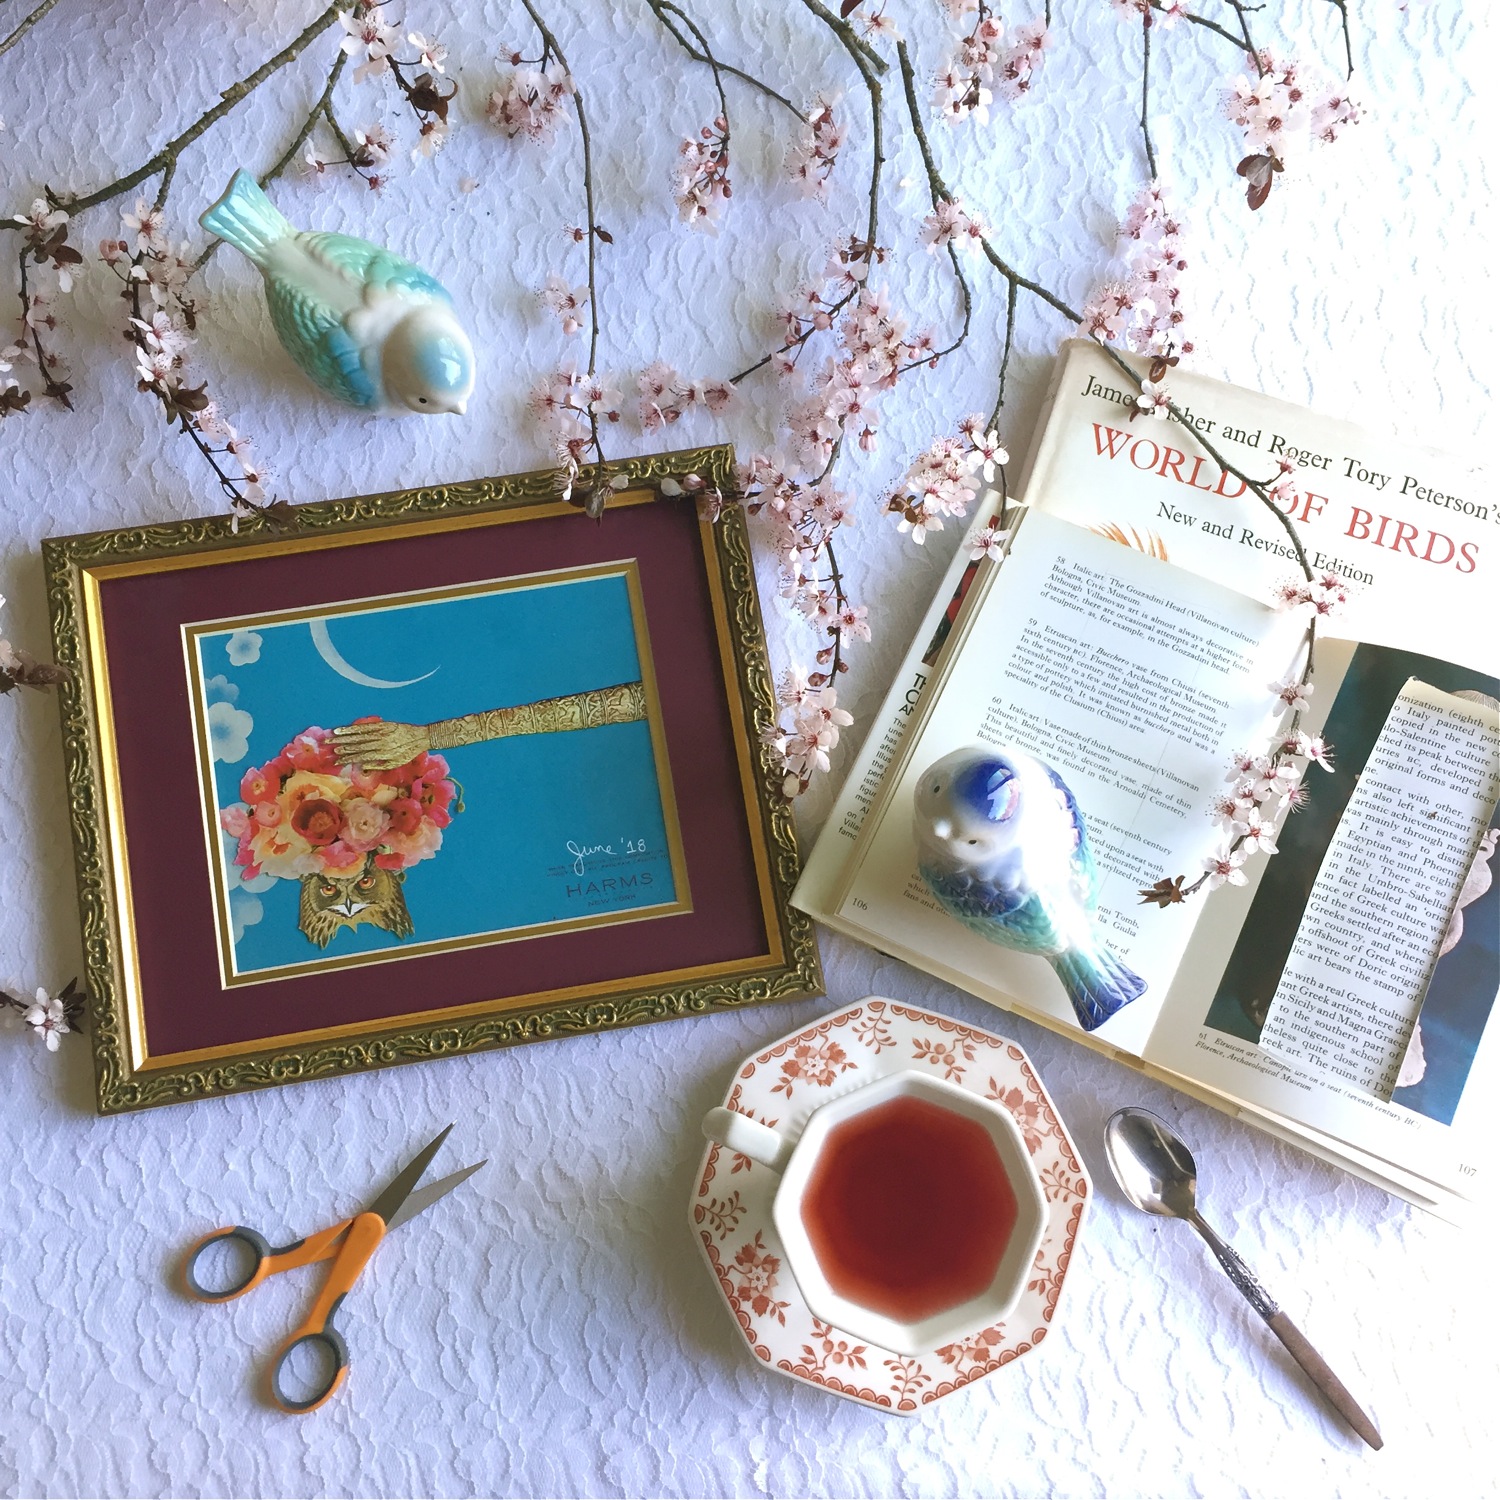 World Collage Day, World Collage Day 2019, collage making, paper collage, Mrs. Grosvenor Contemplates the Evolution of Her Next Tea Party and Owl #1 by June Anderson of Under The Plum Blossom Tree blog